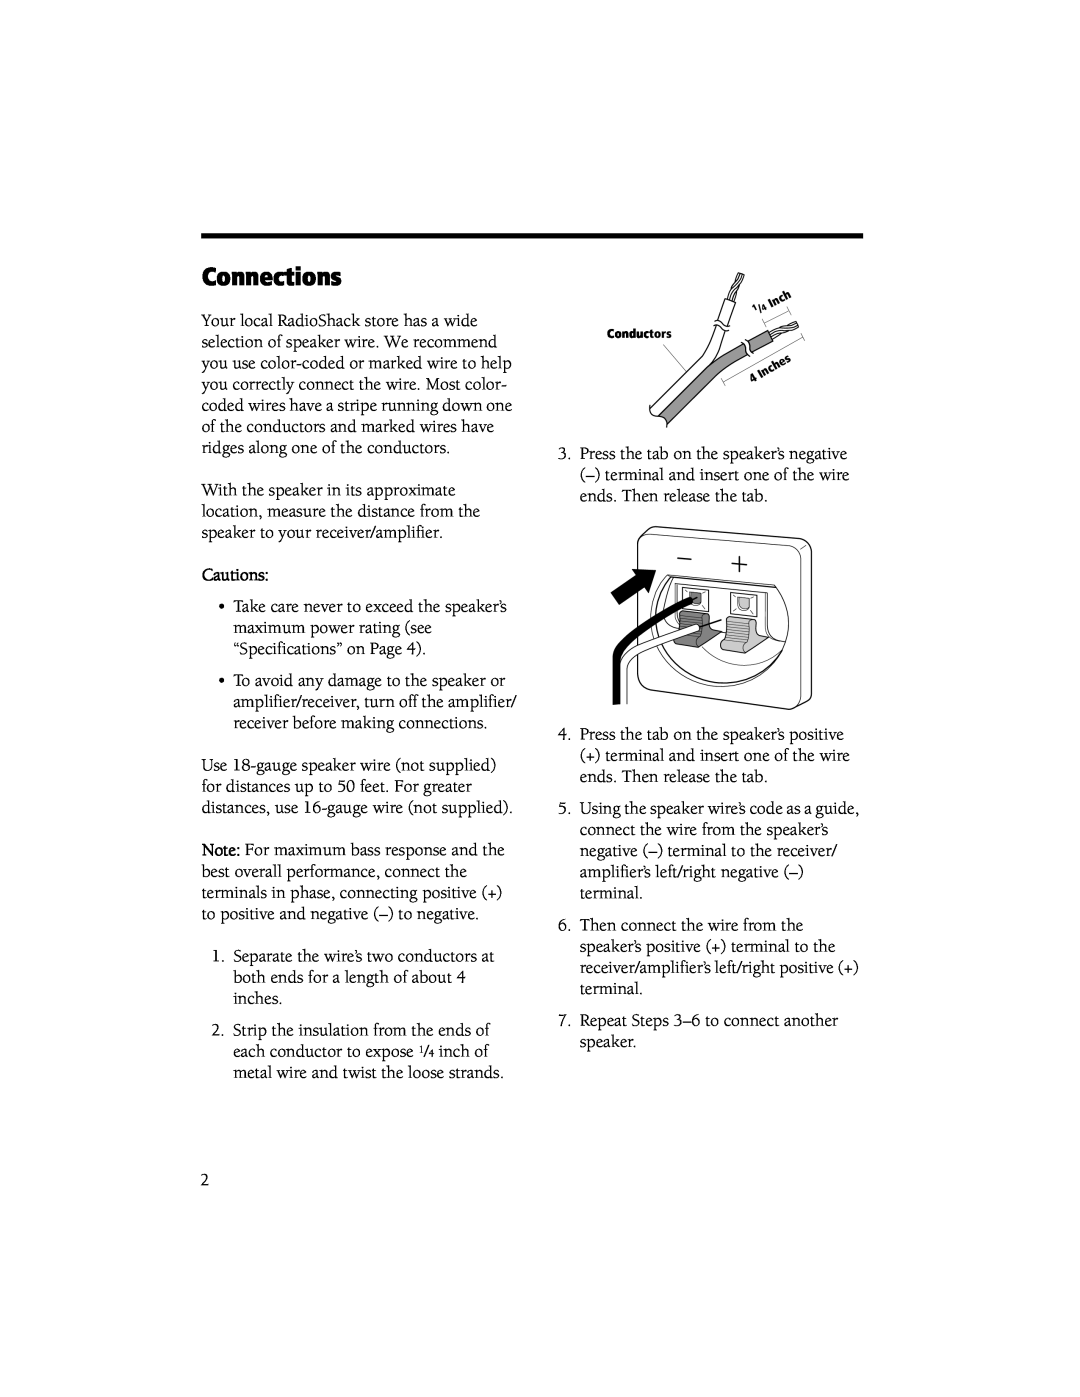 RCA STS-830 manual Connections, Cautions 